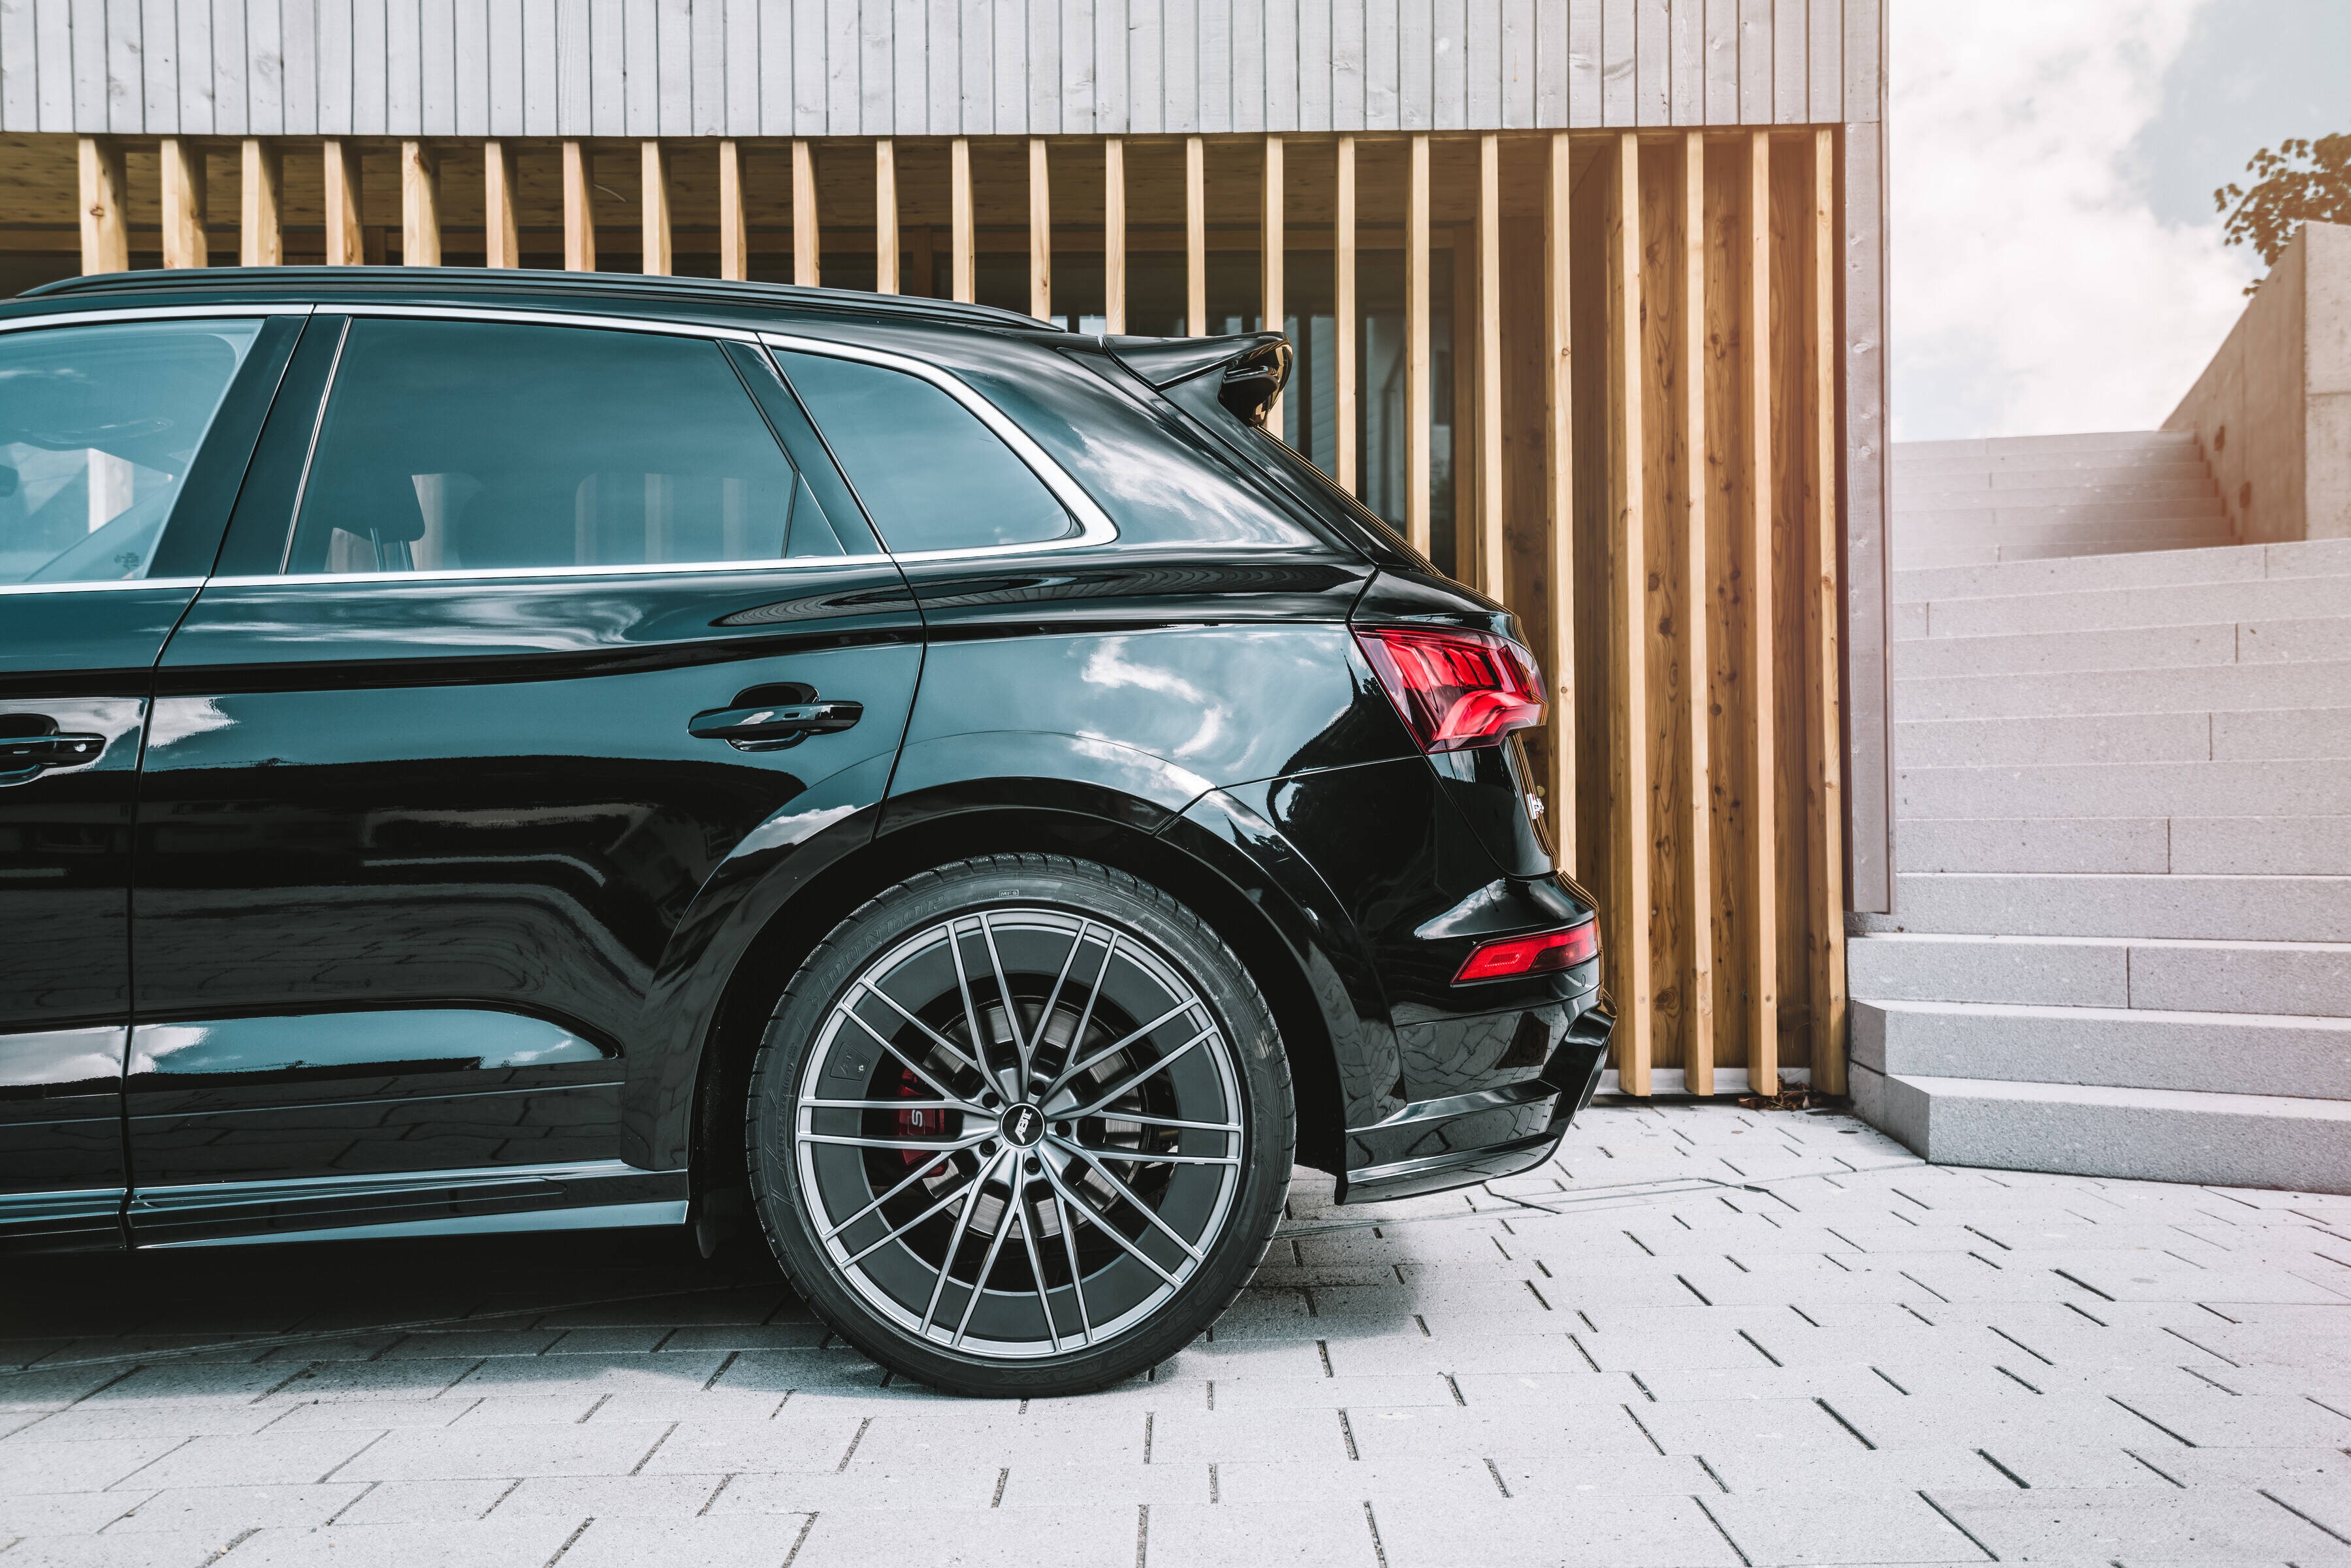 ABT SQ5 TDI scores with 384 hp and 22-inch Sport HR Aero wheels - Audi  Tuning, VW Tuning, Chiptuning von ABT Sportsline.